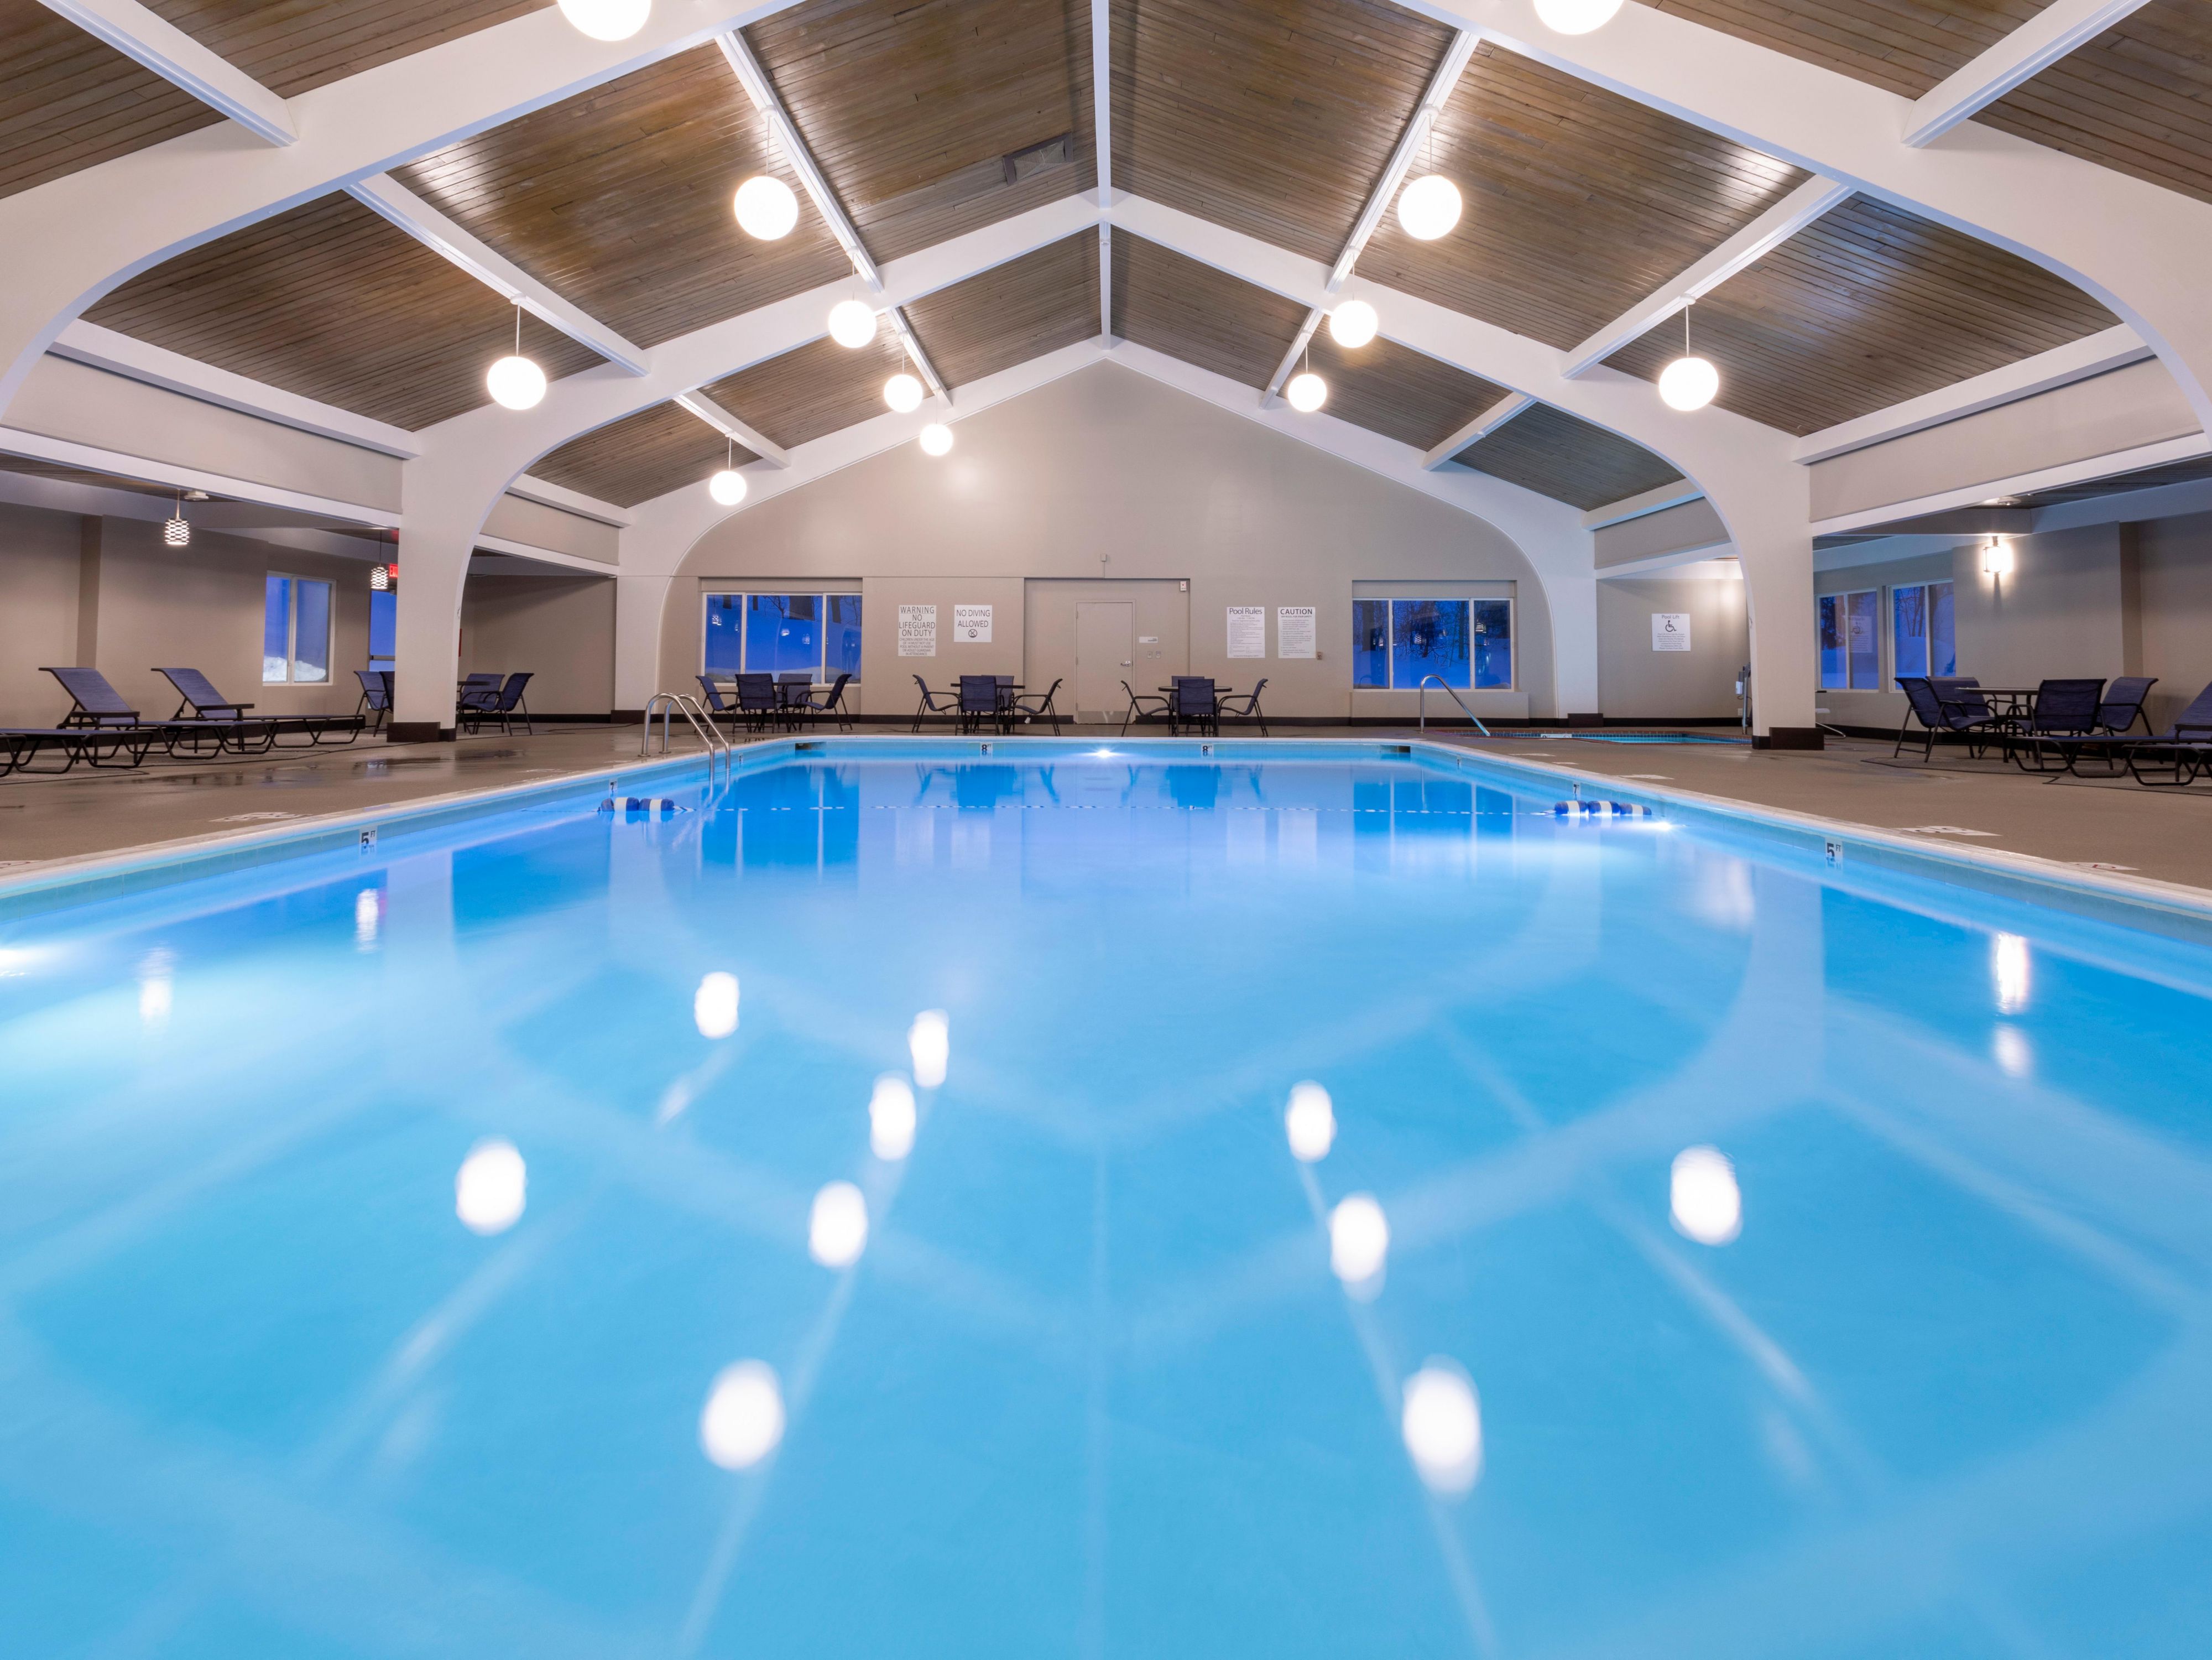 Enjoy a swim or leisurely splash in Marquette’s largest indoor pool, with depths up to eight feet, ideal for laps or a refreshing dip. Take a soothing soak in the hot tub and unwind in the sauna for wellness and relaxation.